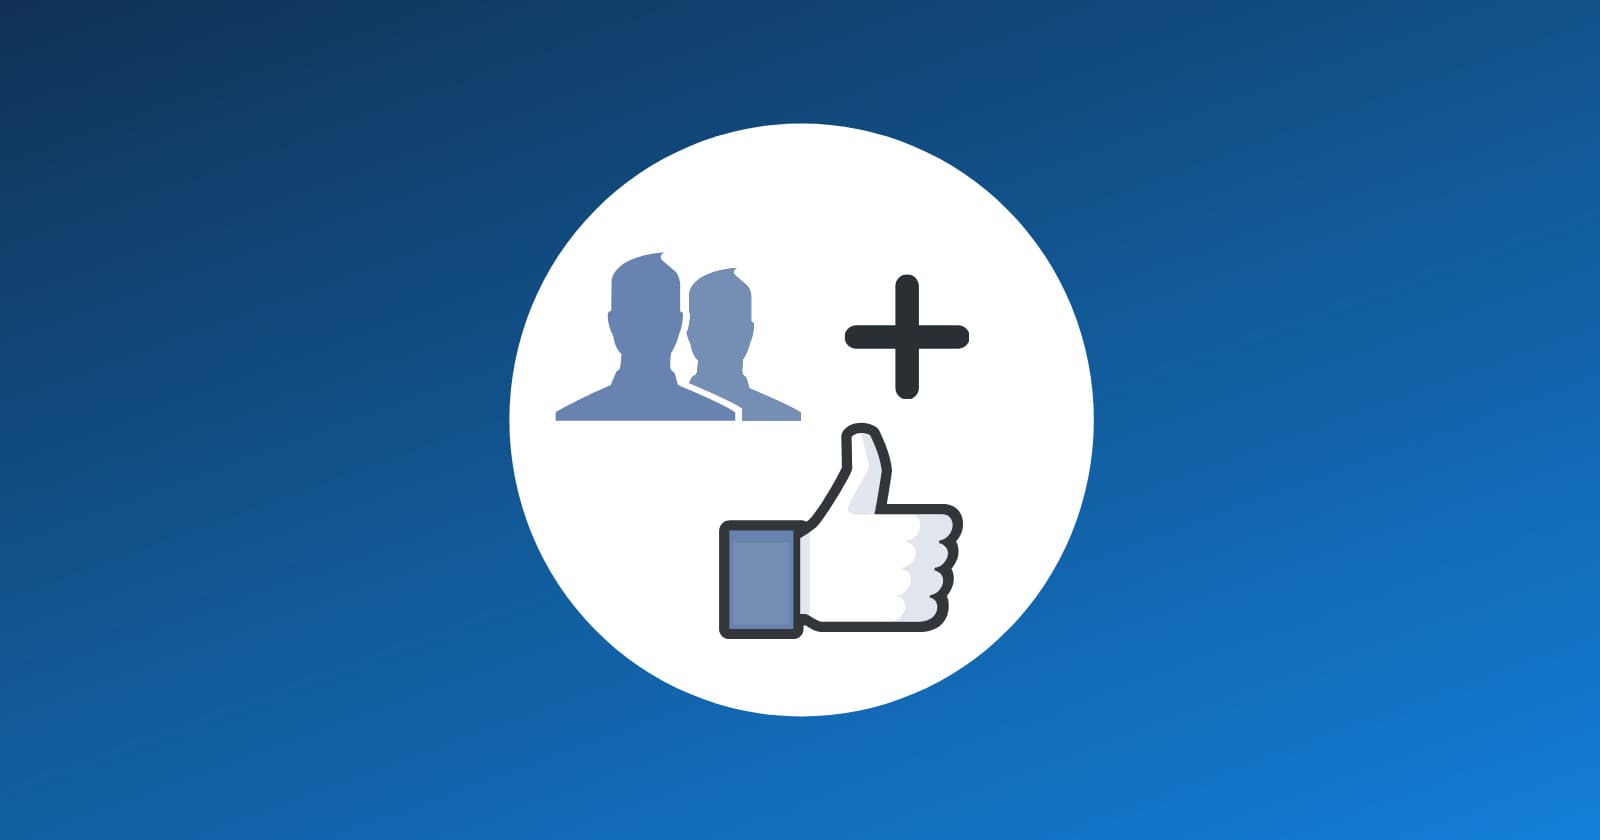 invite your friends to like your Facebook page